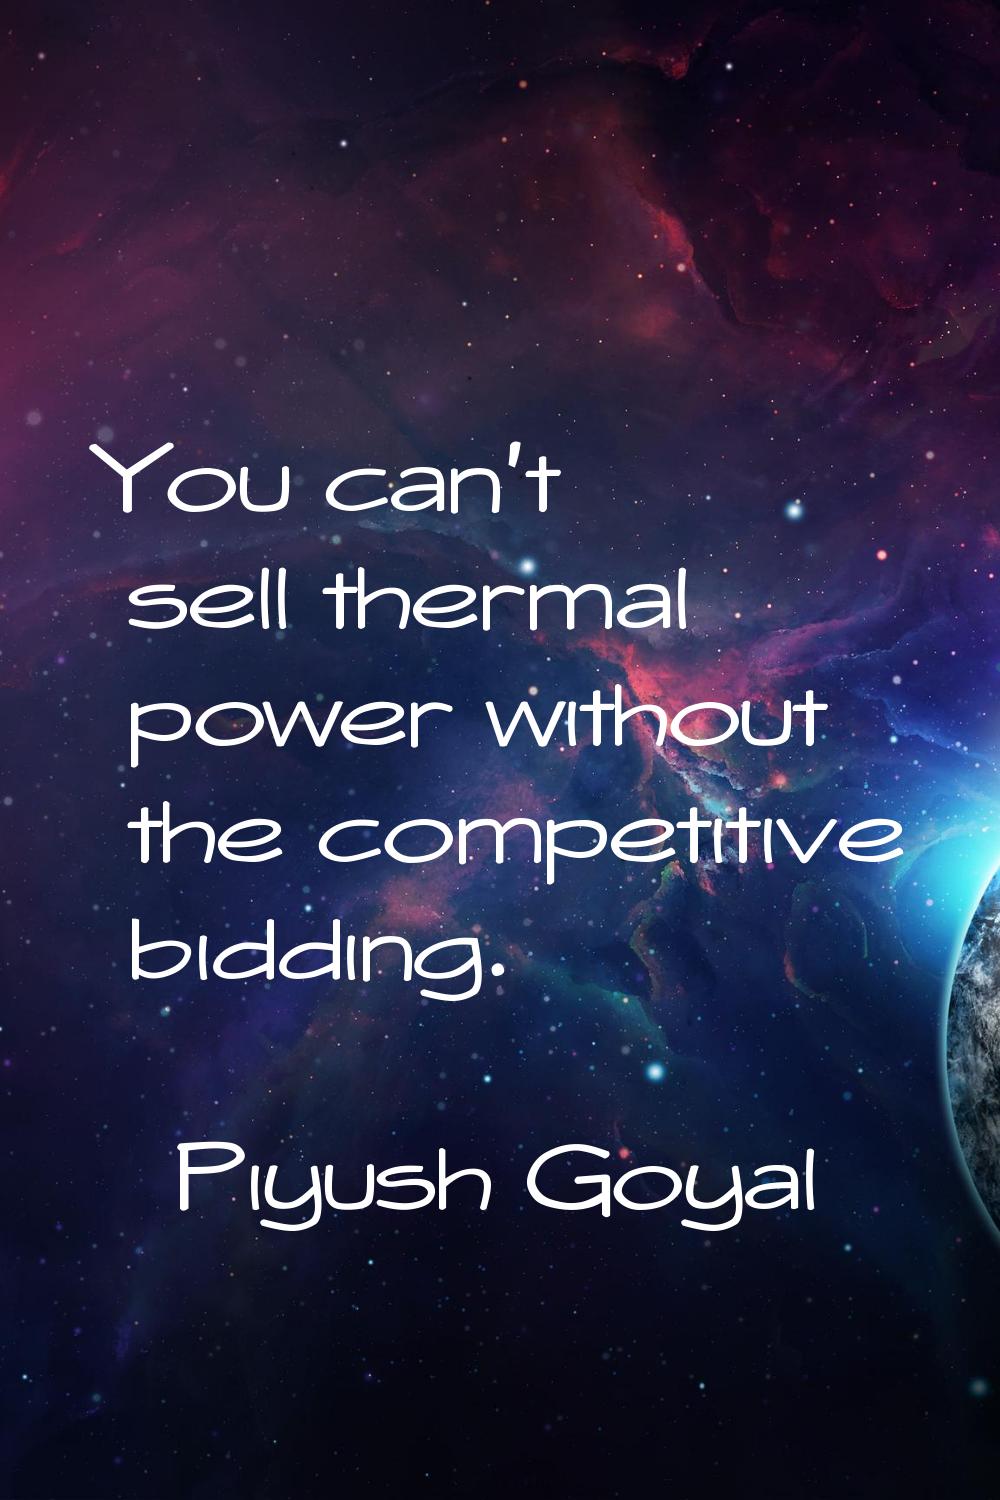 You can't sell thermal power without the competitive bidding.